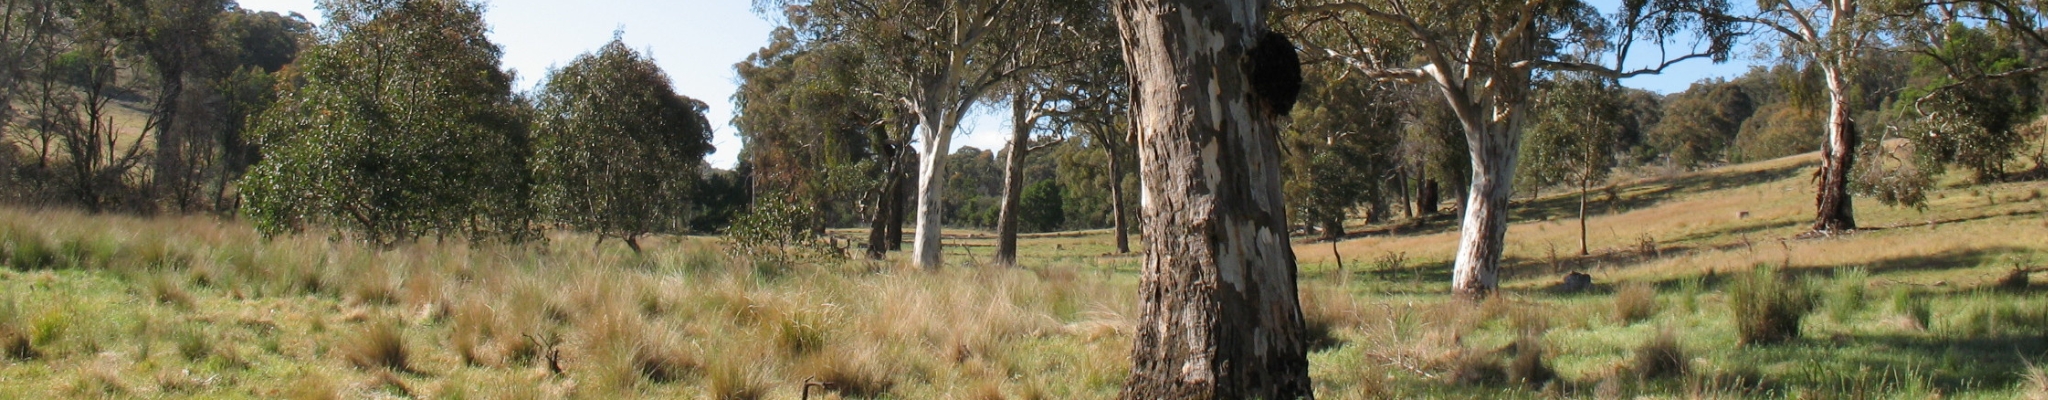 A scene of large native Australian woodlands trees prevalent on the slopes and tableland regions of NSW.